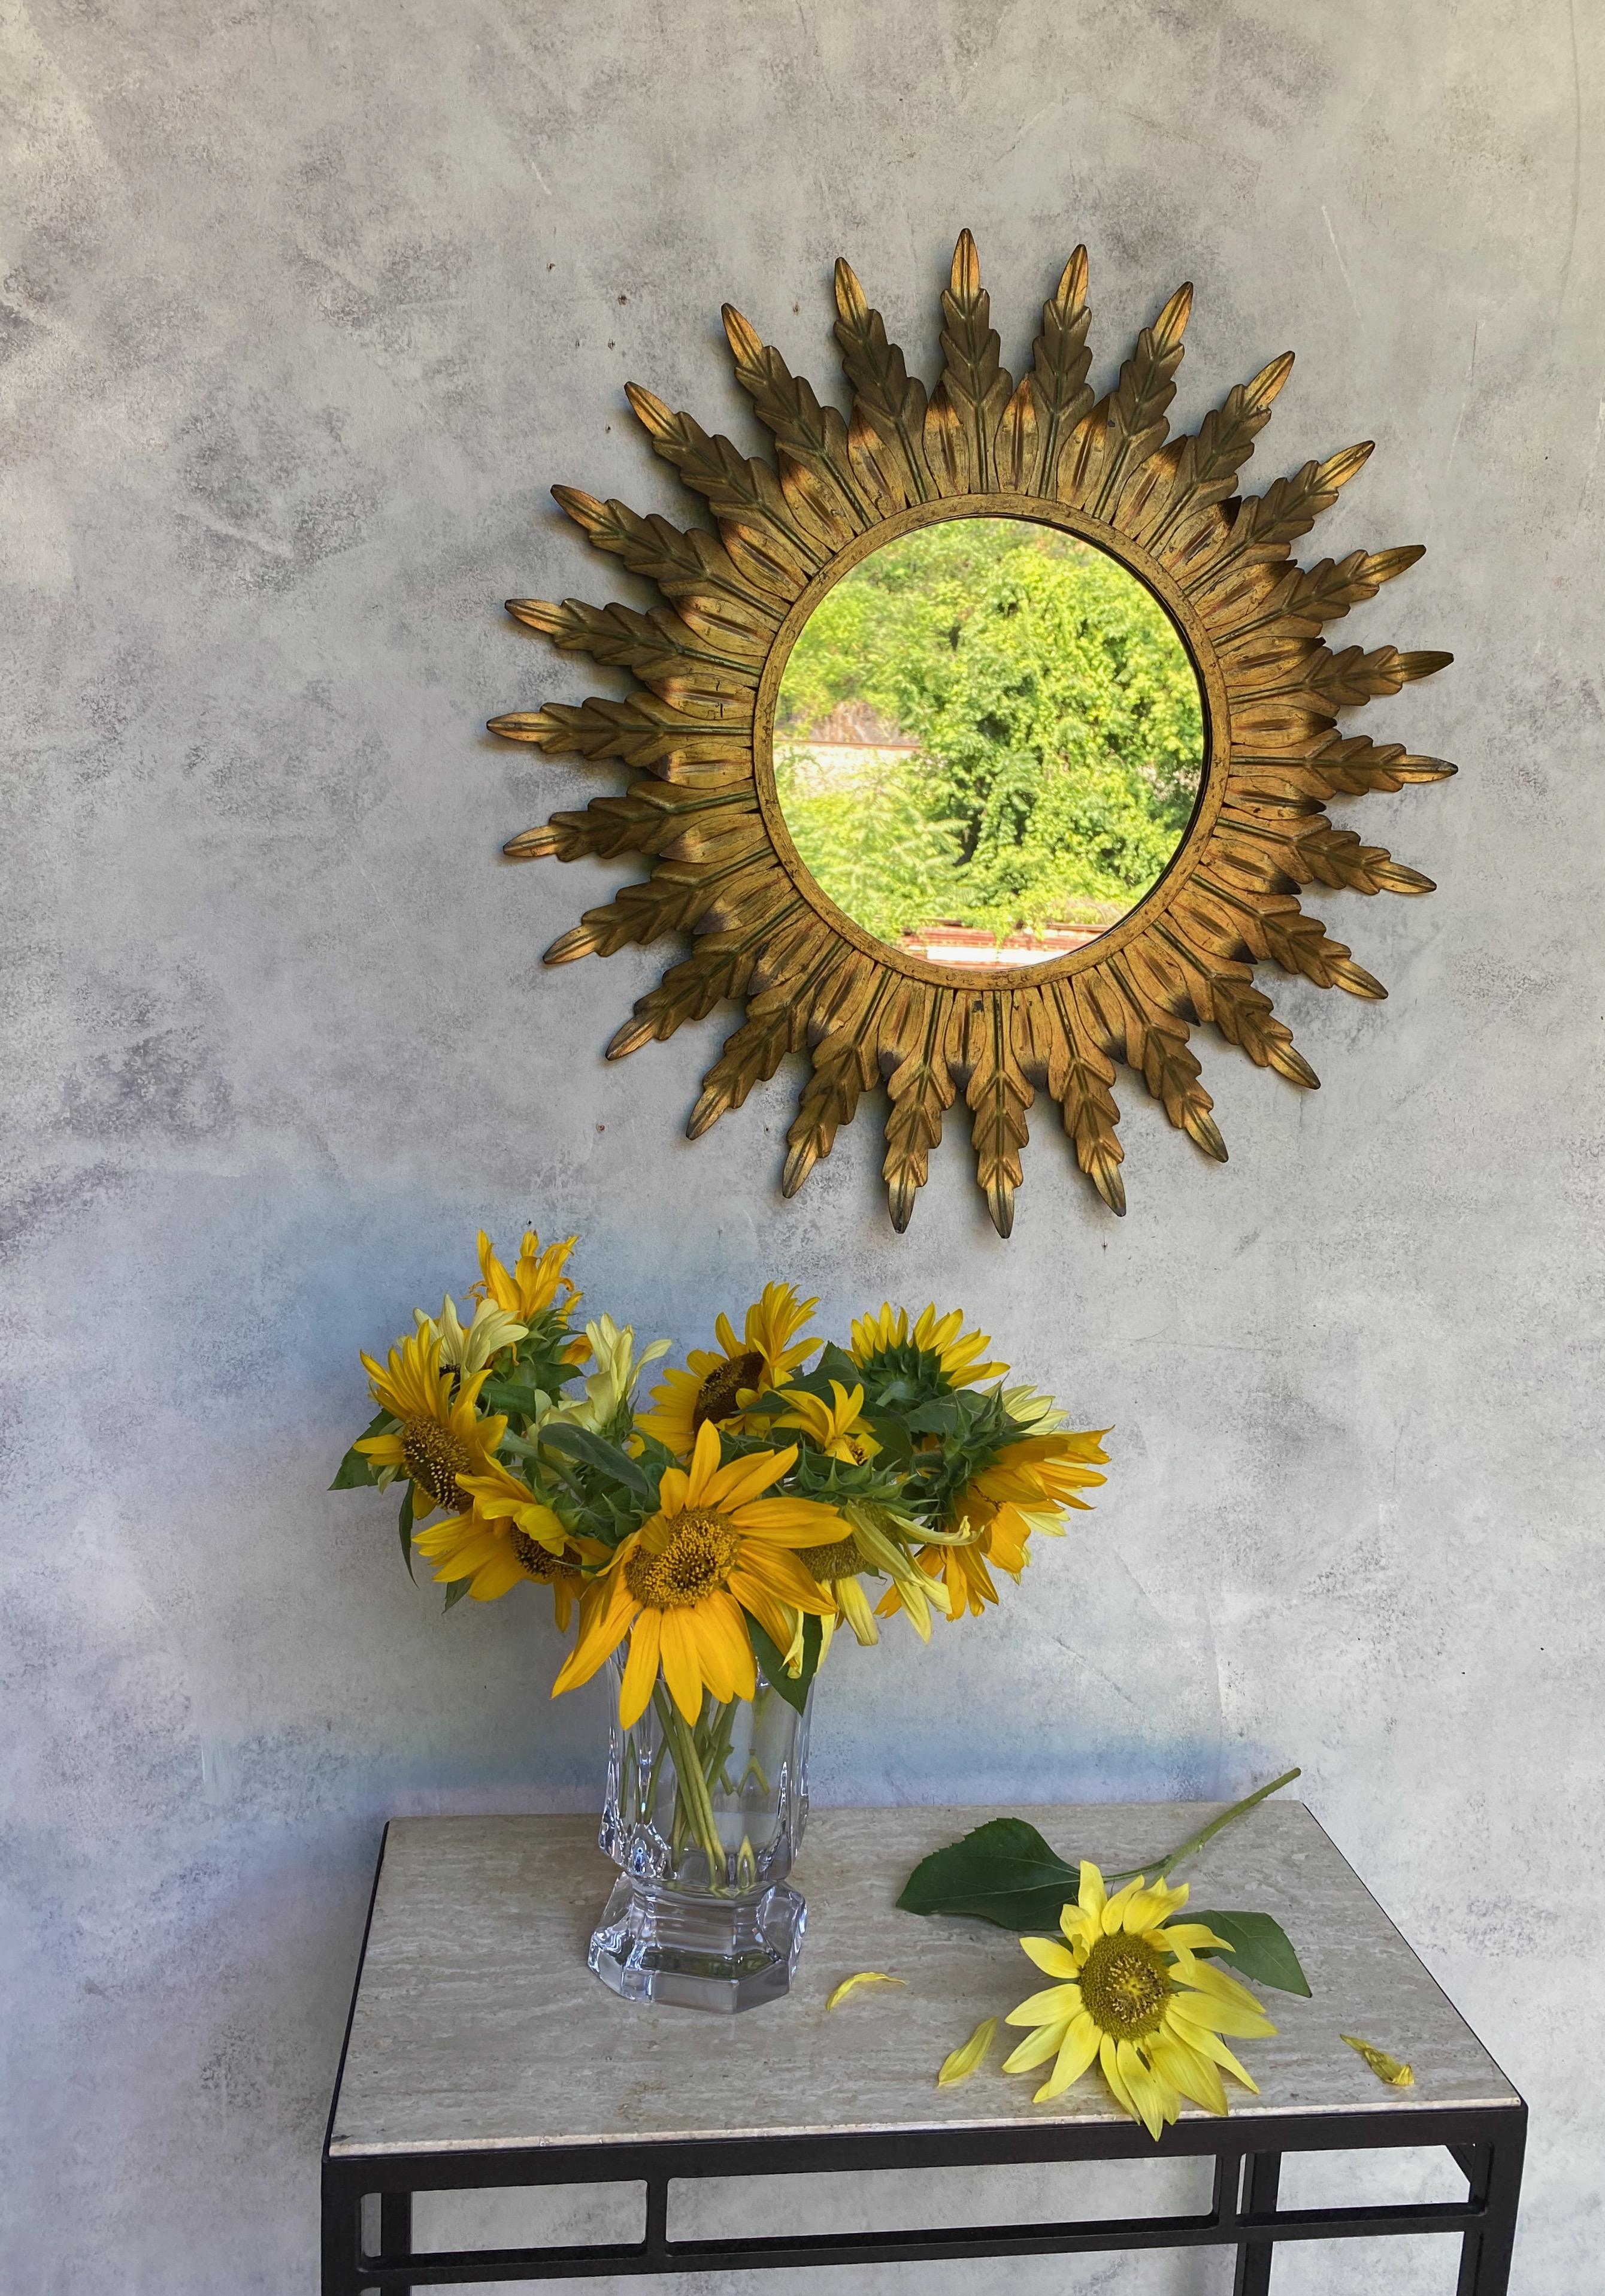 Spanish Gilt Metal Sunburst Mirror with Radiating Leaves and Traces of Green Hues